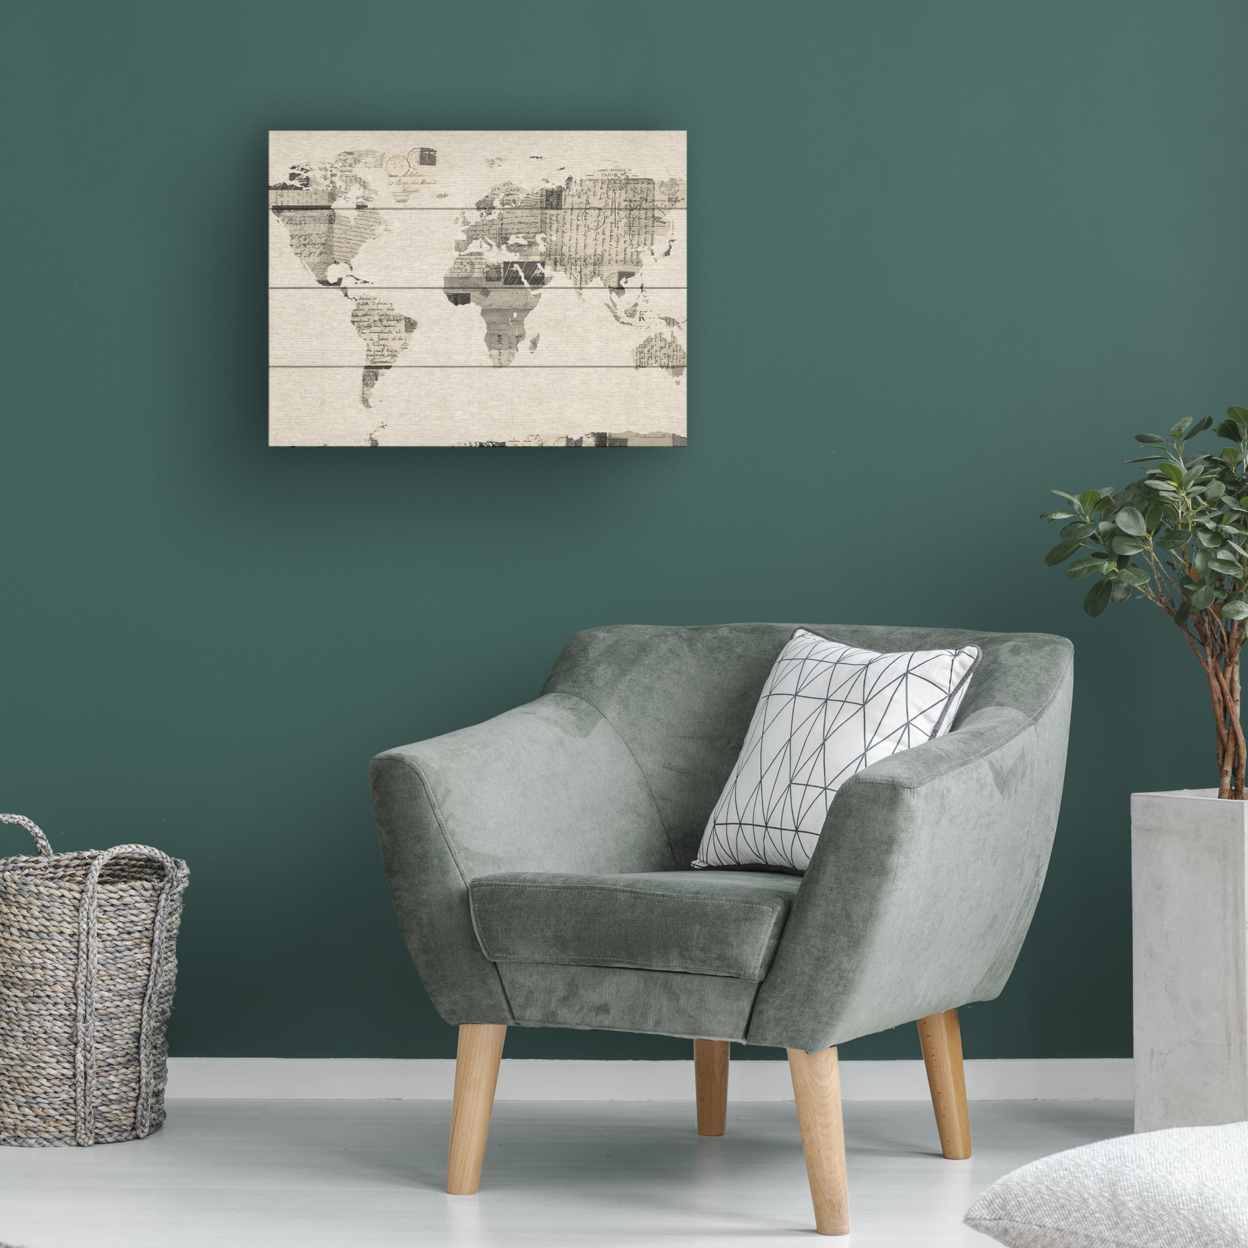 Wall Art 12 X 16 Inches Titled Vintage Postcards World Map Ready To Hang Printed On Wooden Planks